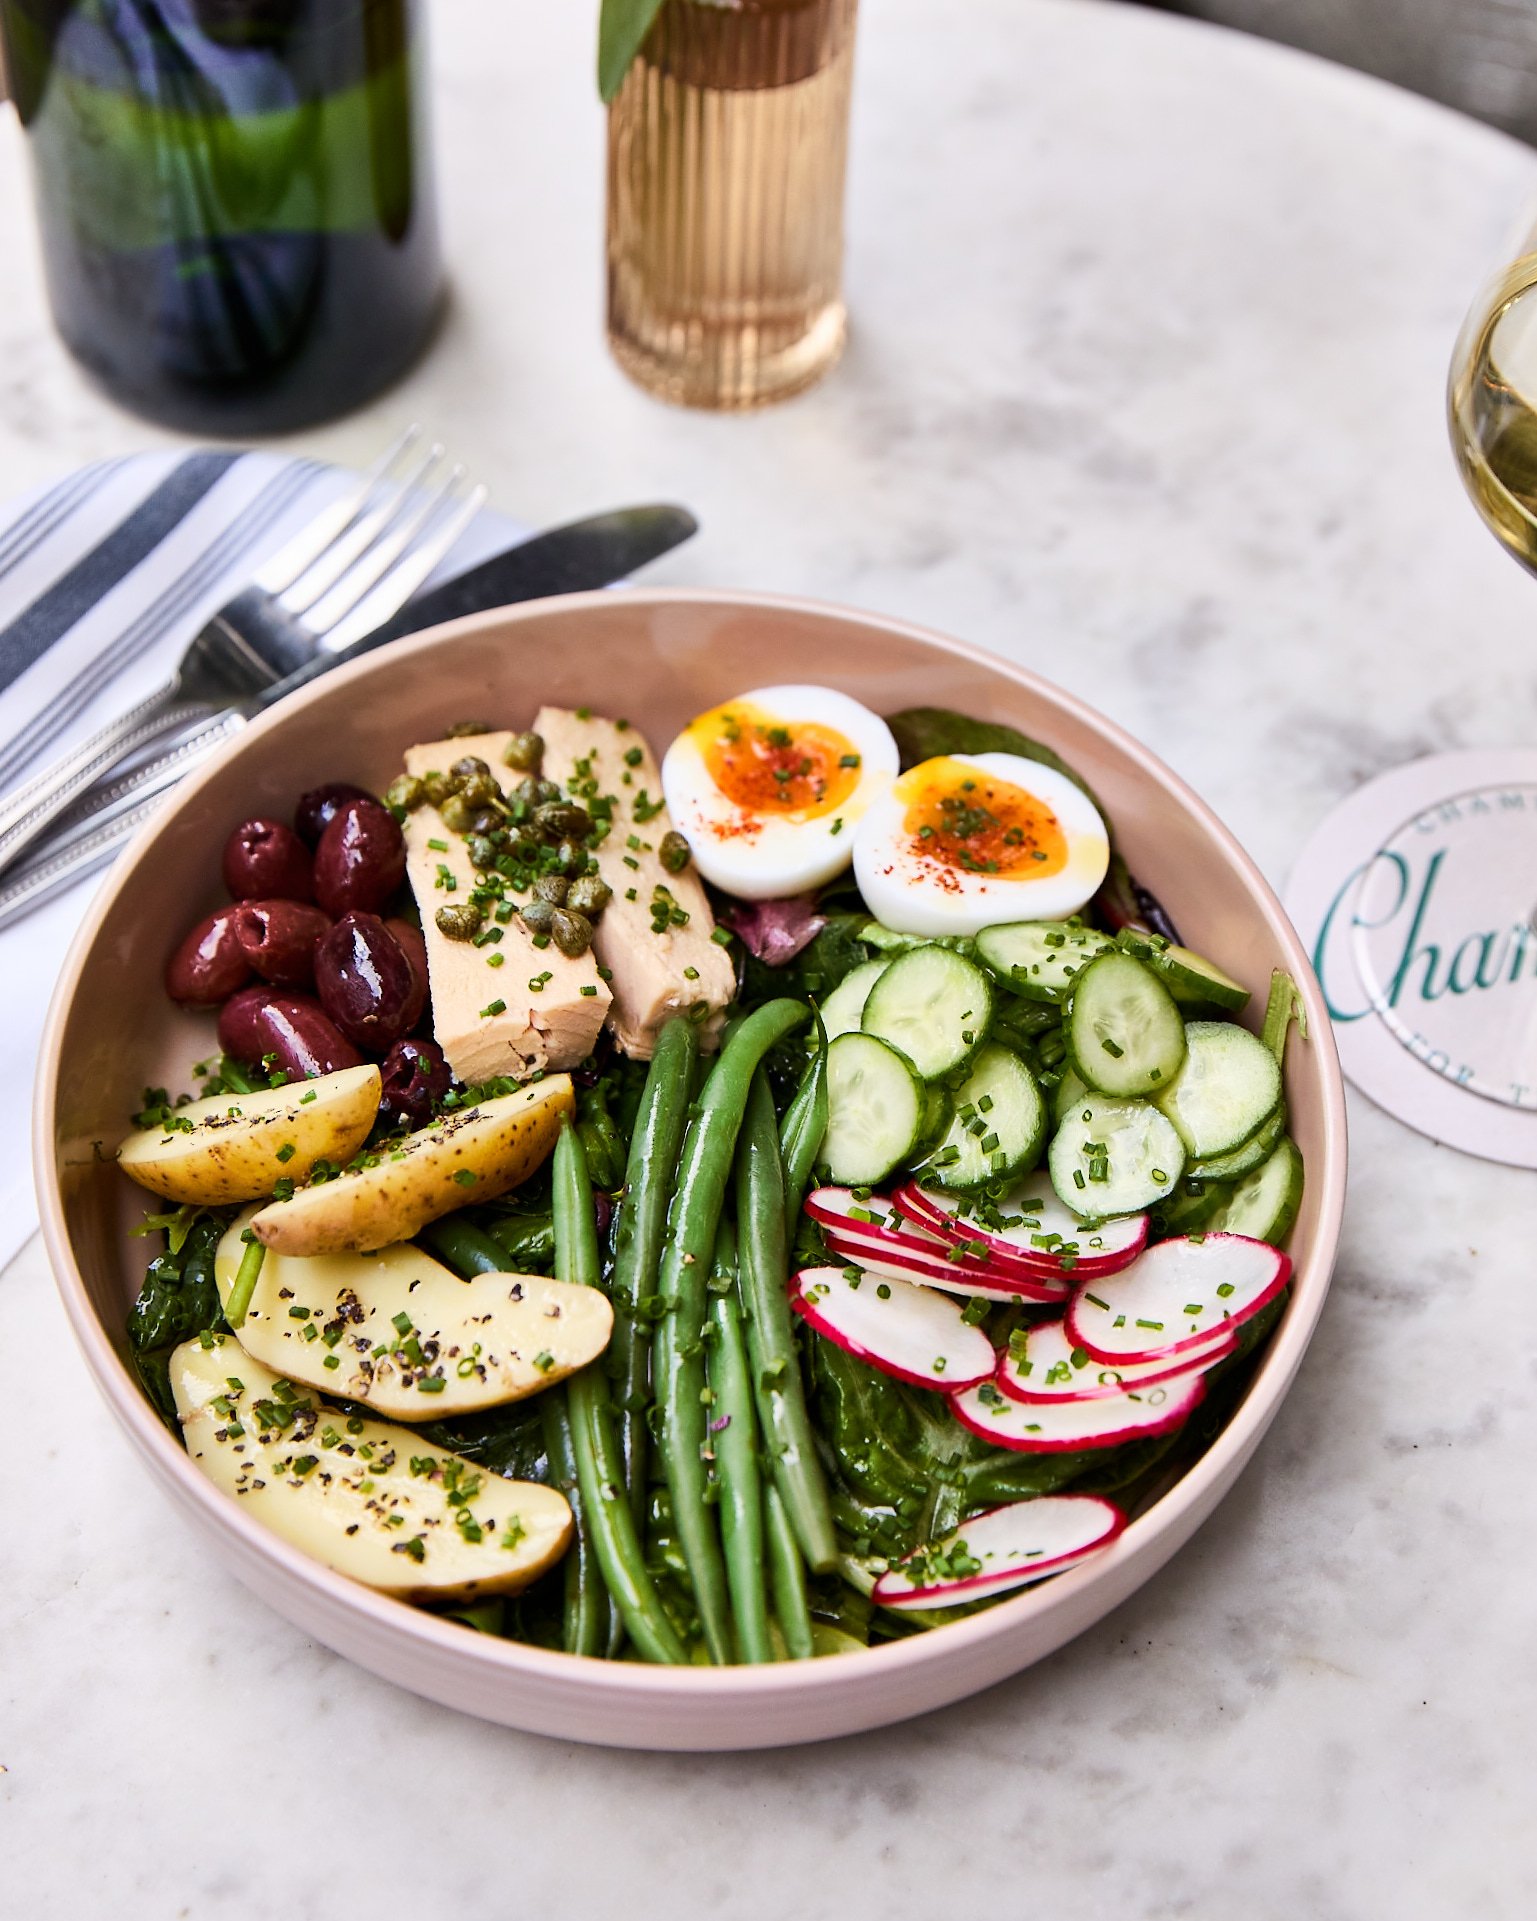 Champers_LunchSalads_010.jpg